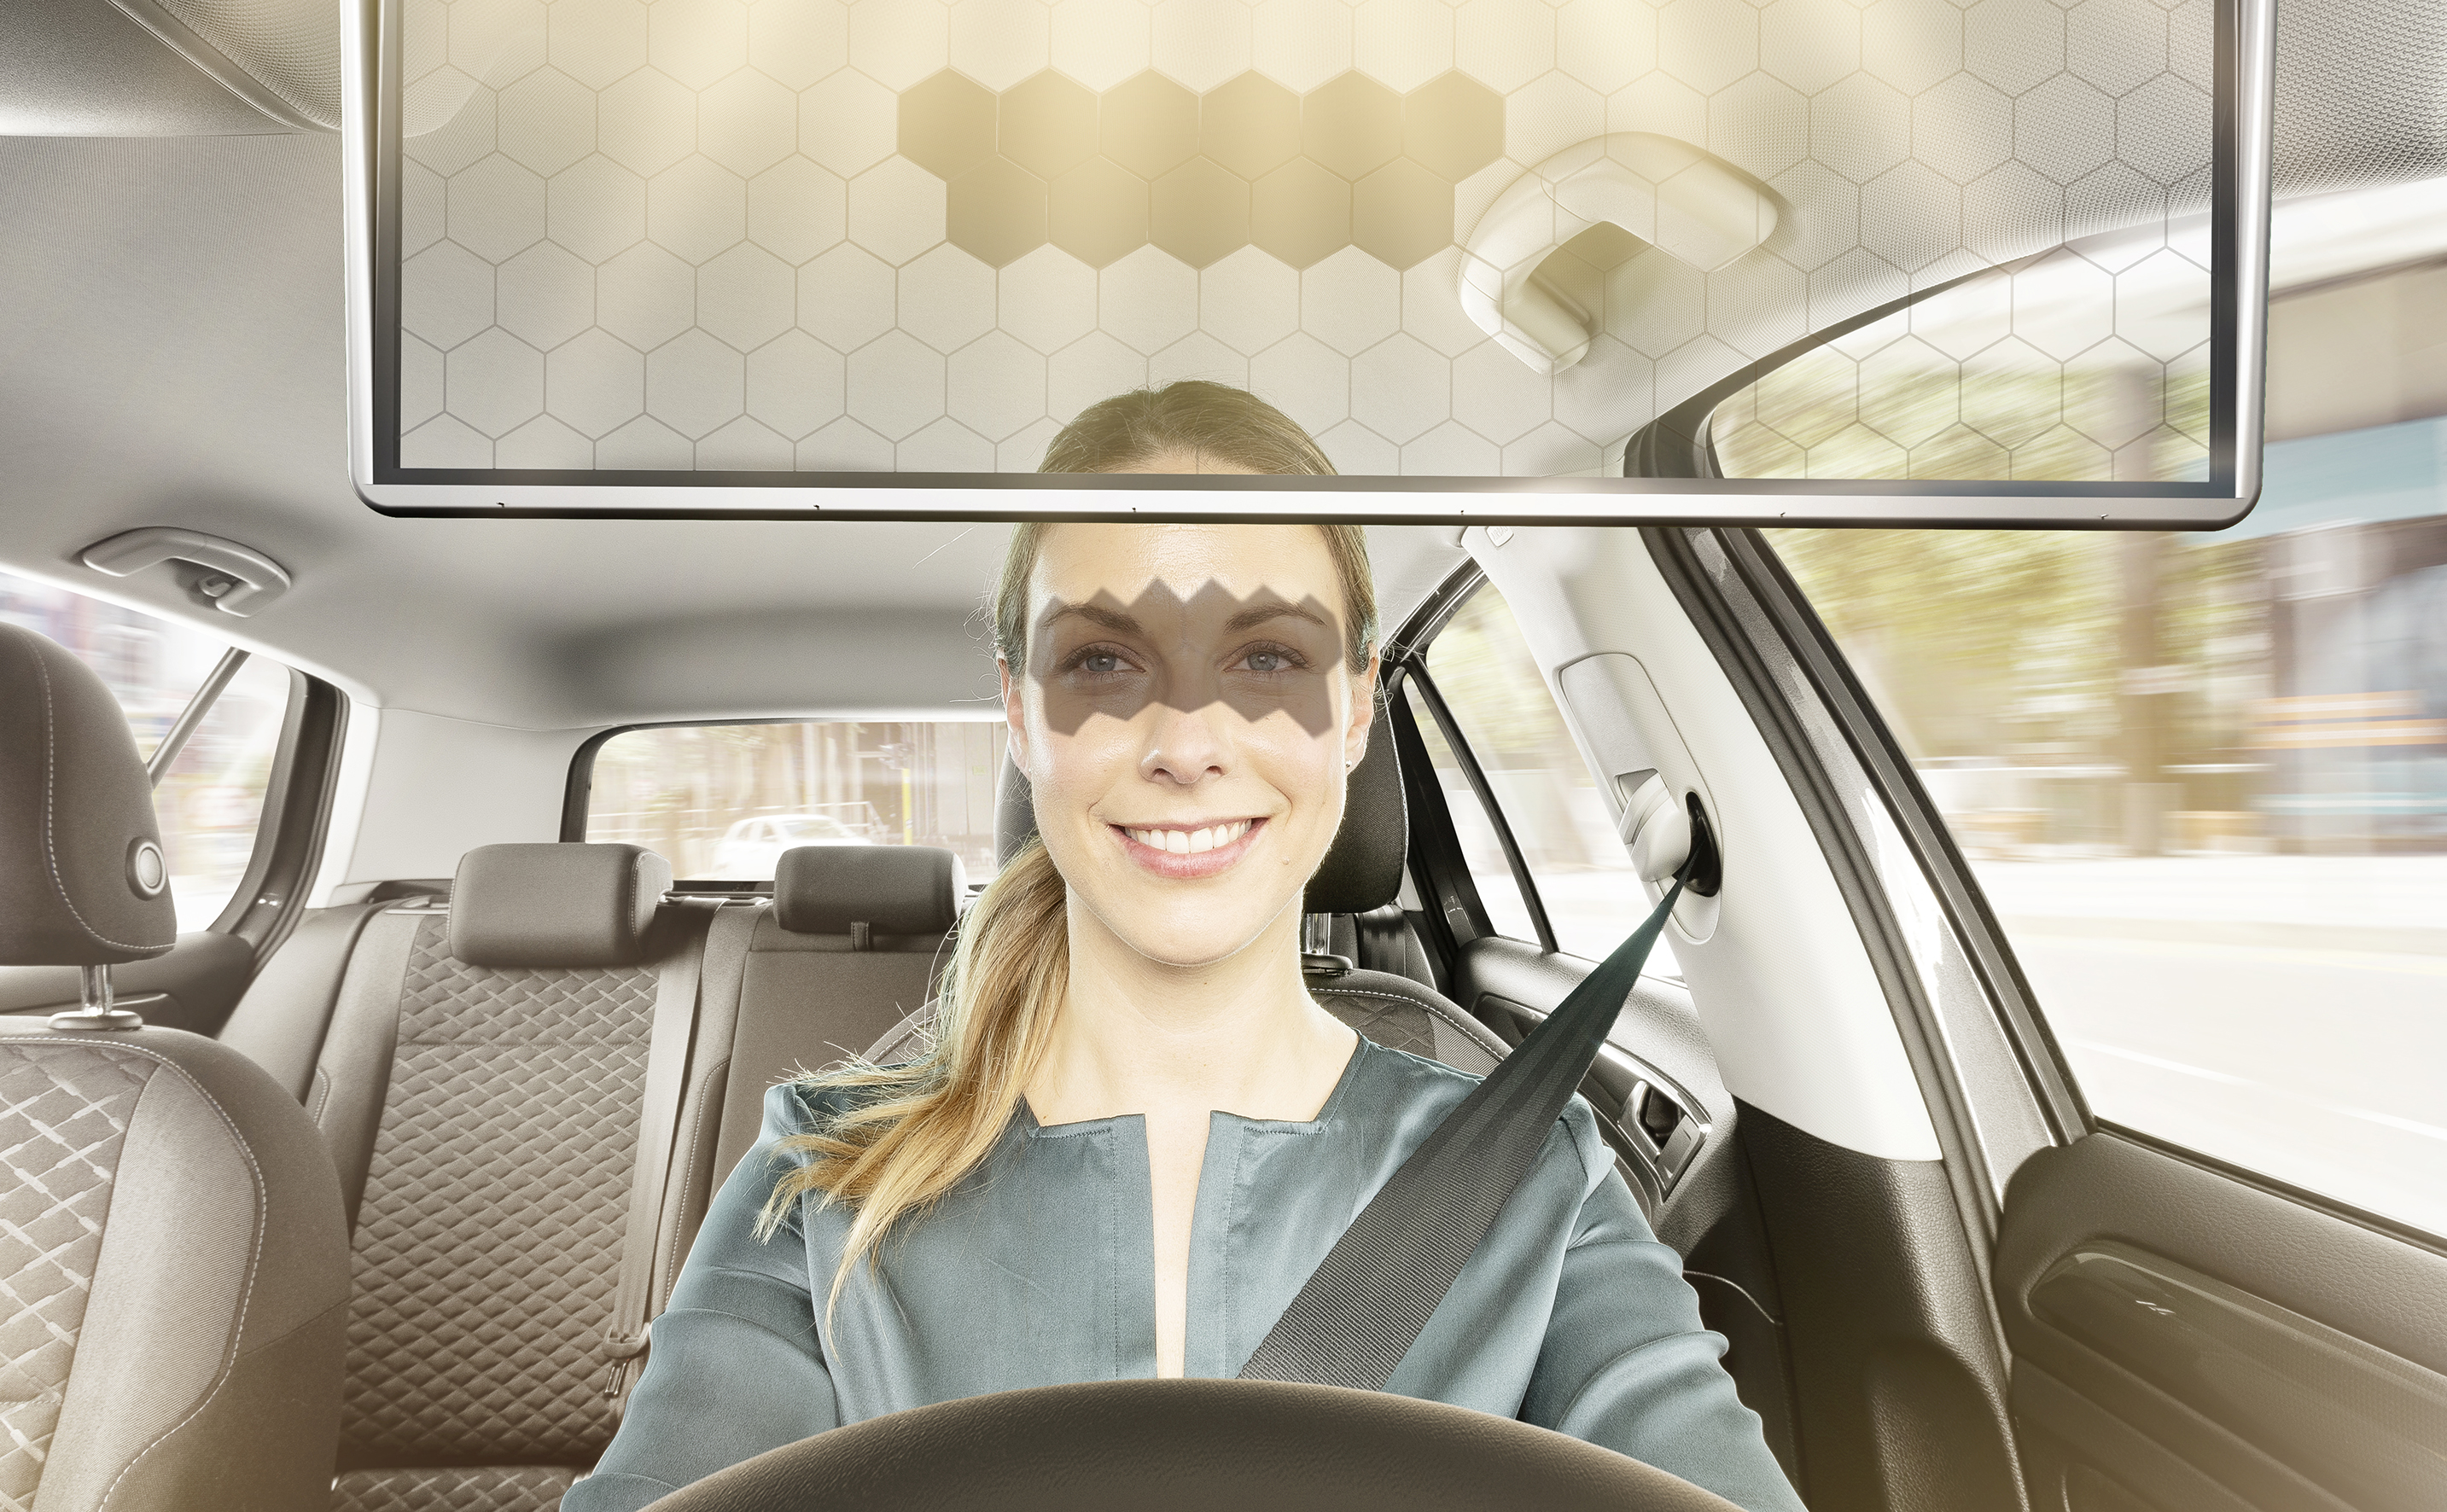 Bosch’s new Virtual Visor greatly improves driver safety and comfort